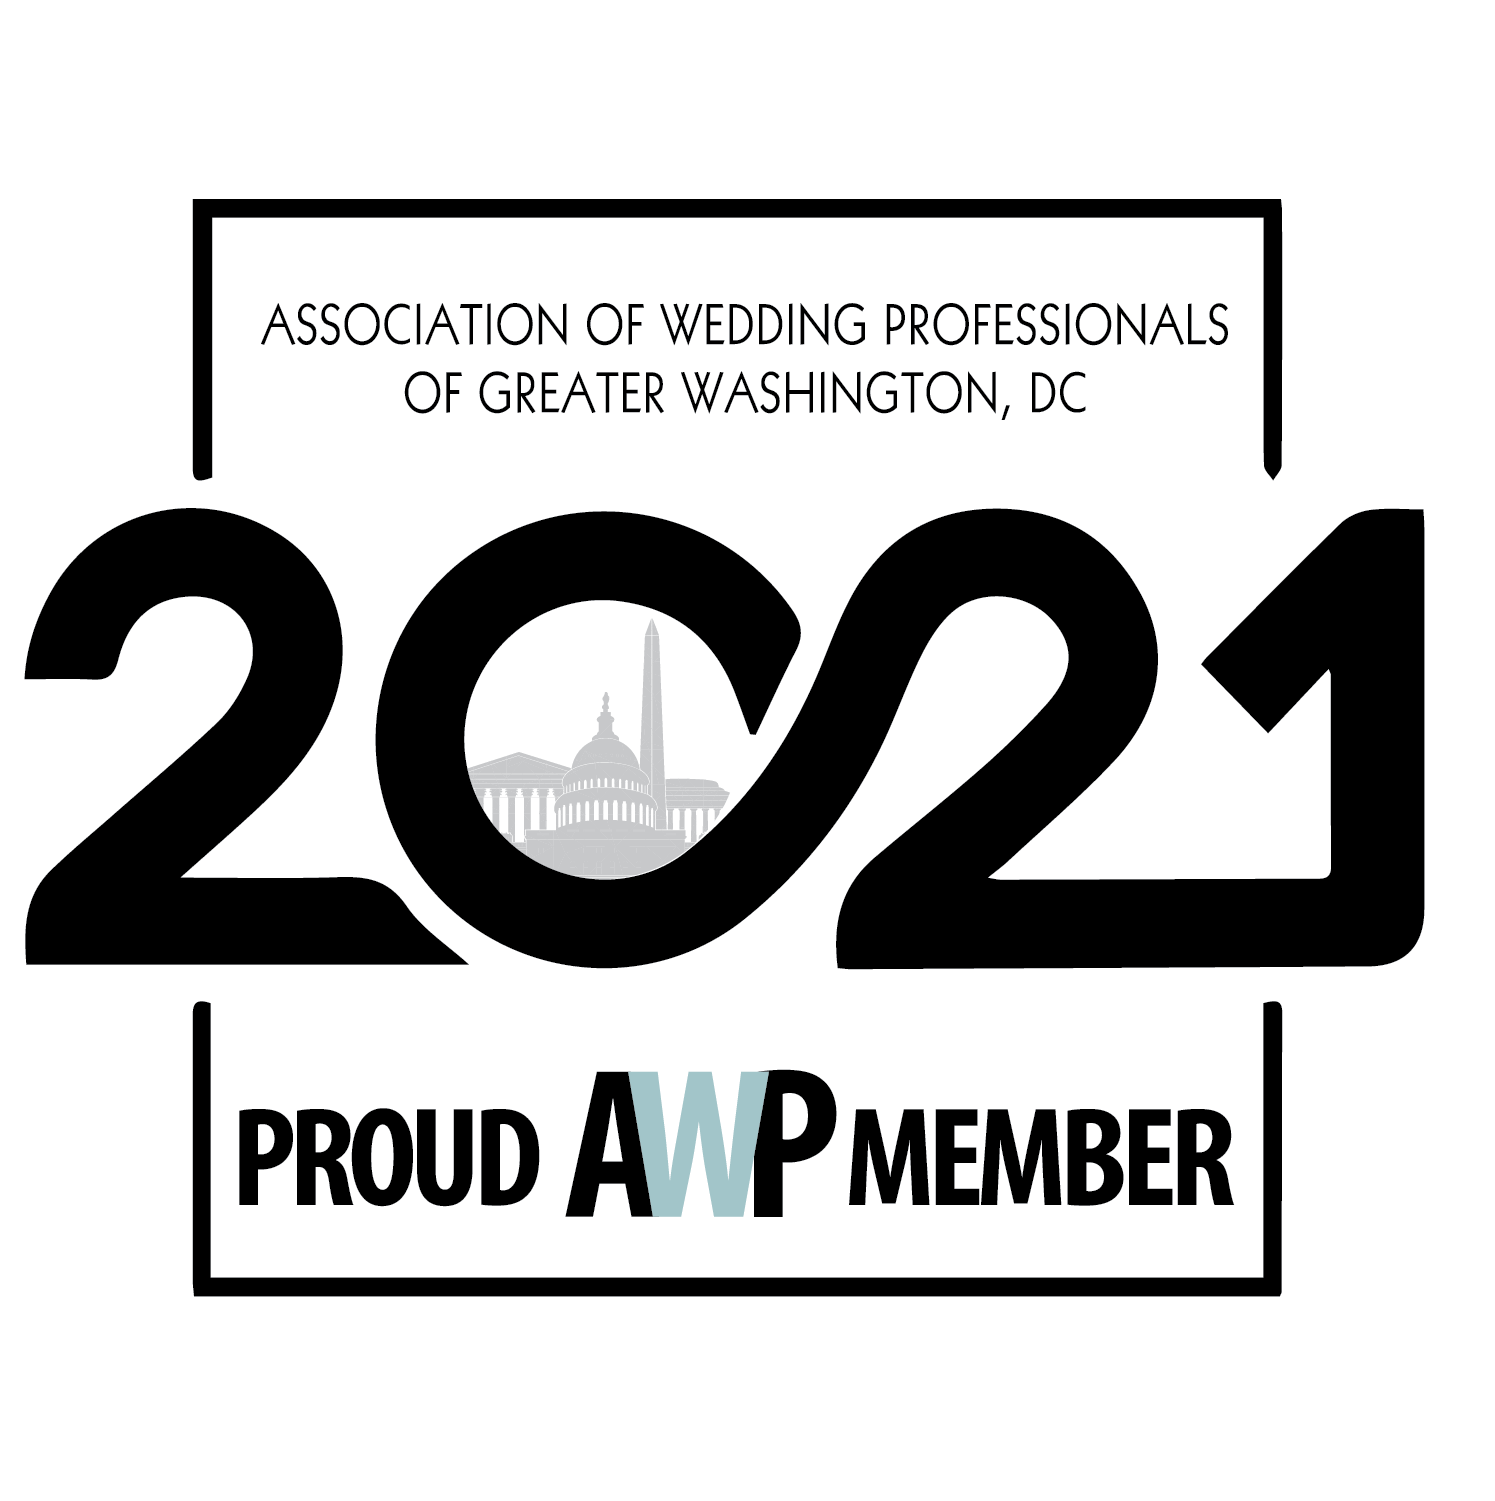 The logo for the association of wedding professionals in the greater Washington area, including Virginia and DC DJs.